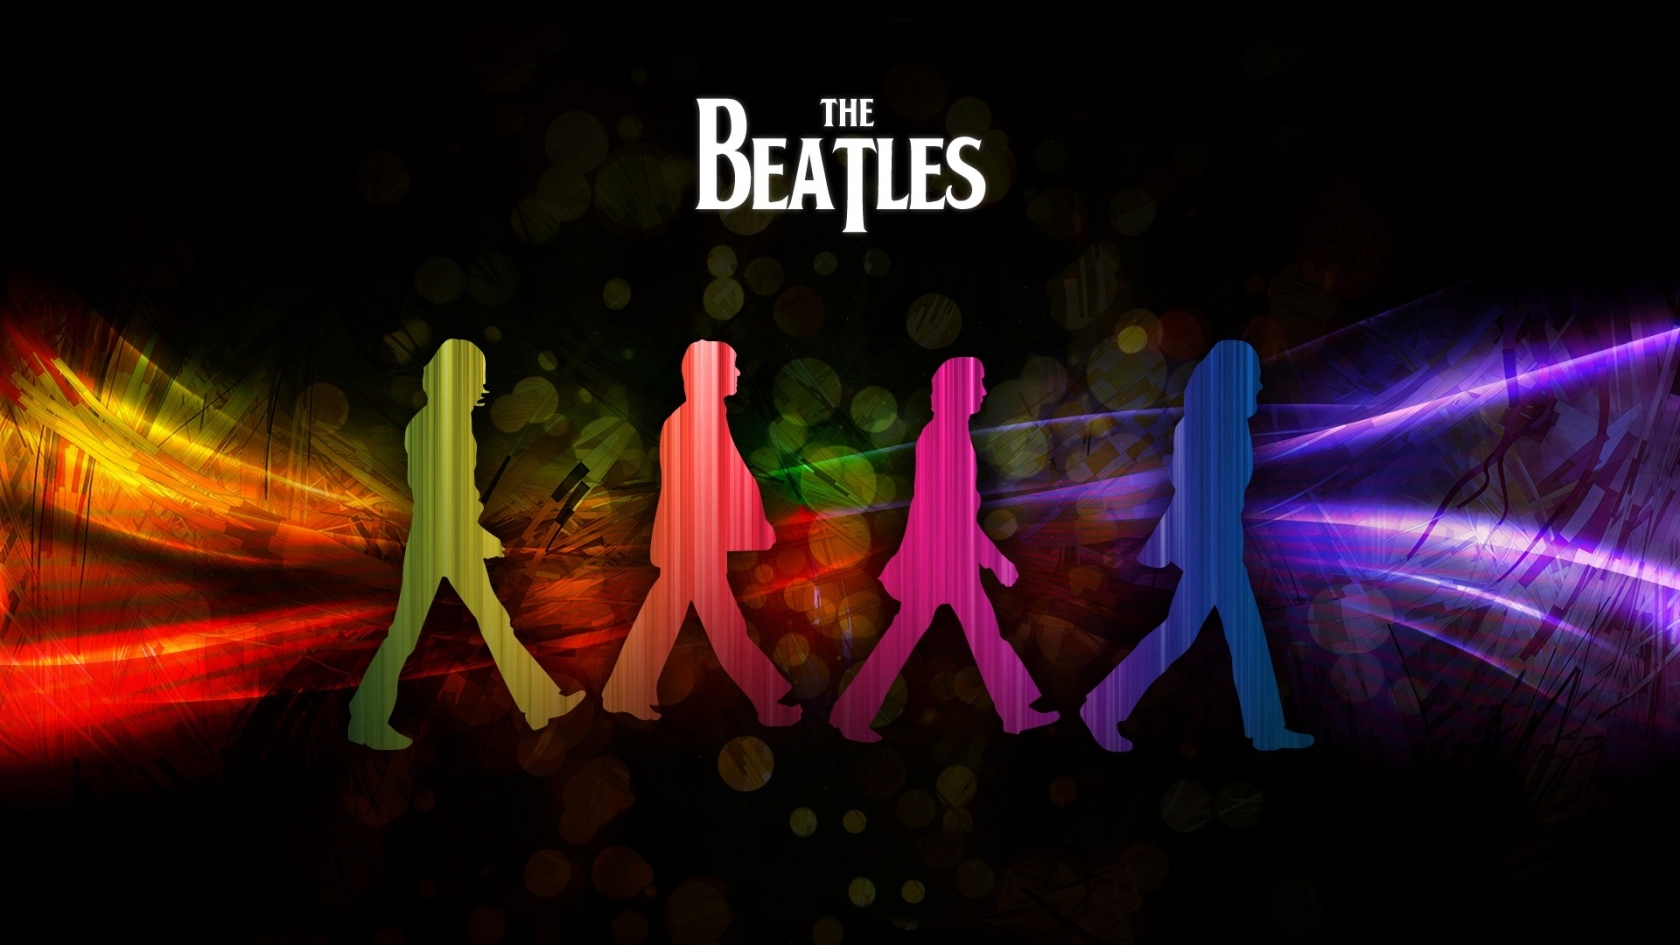 The Beatles Shadows for 1680 x 945 HDTV resolution